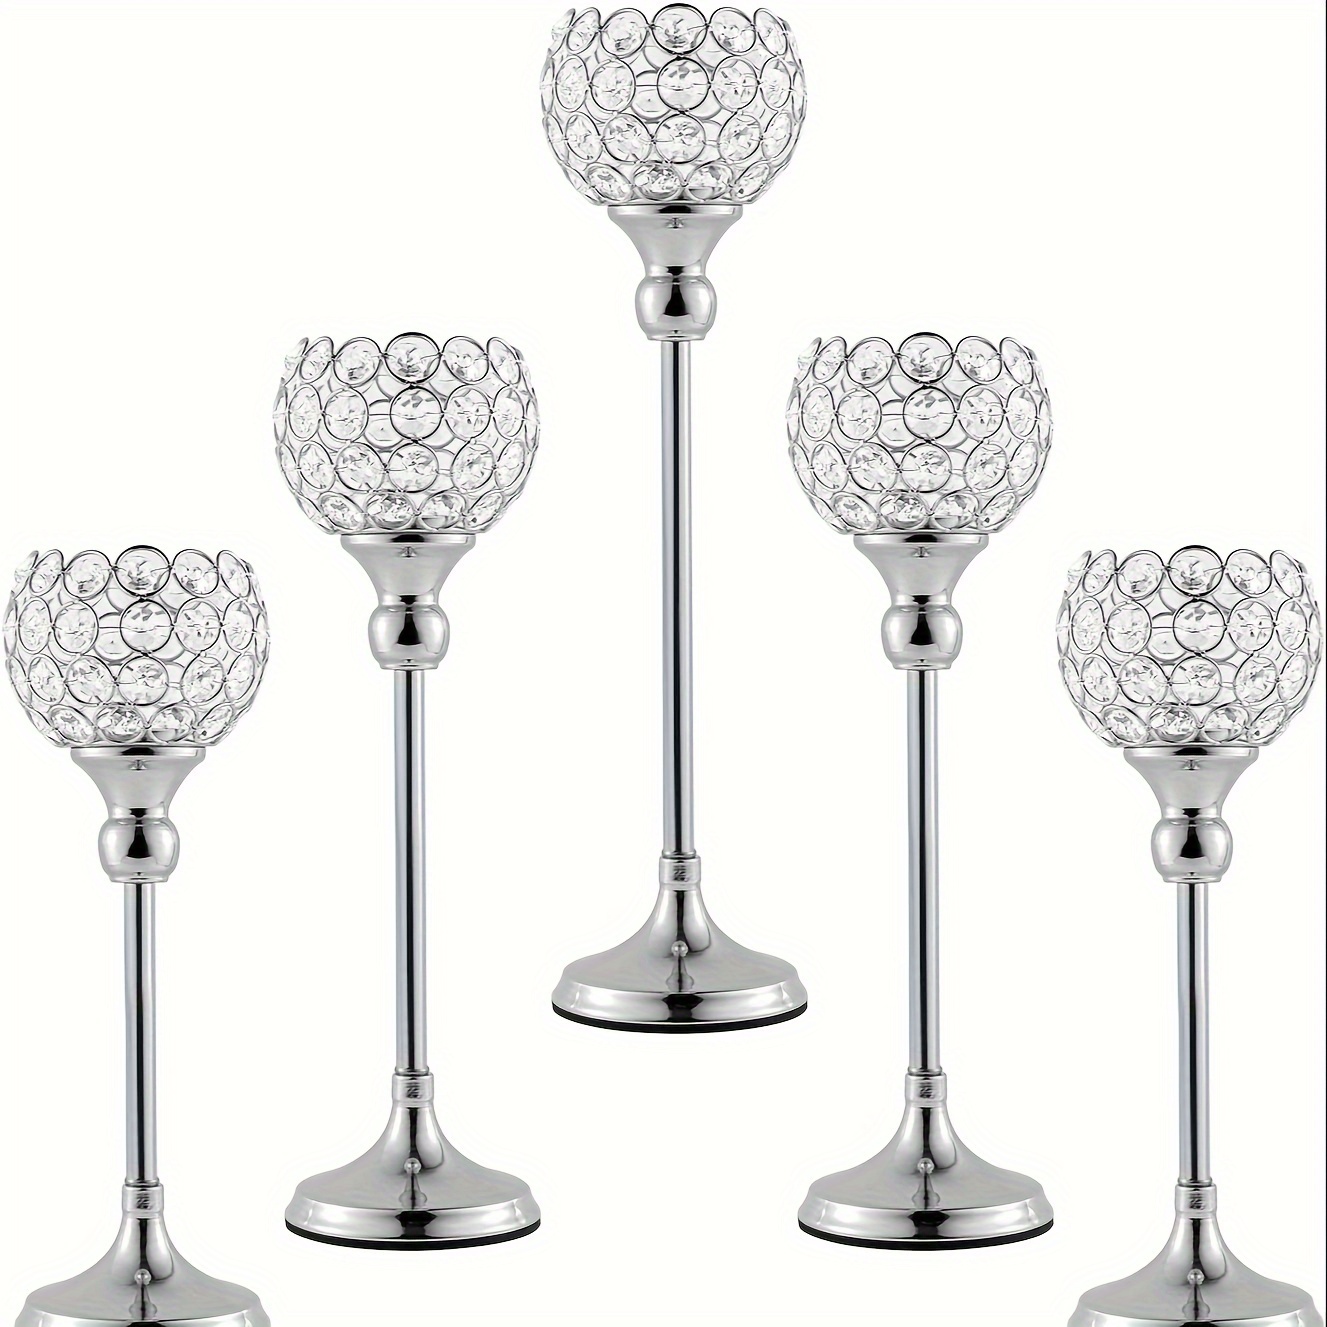 

Set Of 5 Silver Crystal Candle Holder, Tea Light Candlestick Holders For Wedding Decoration, Centerpiece For Party Birthday Living Room Dining Tale Centerpiece Decor